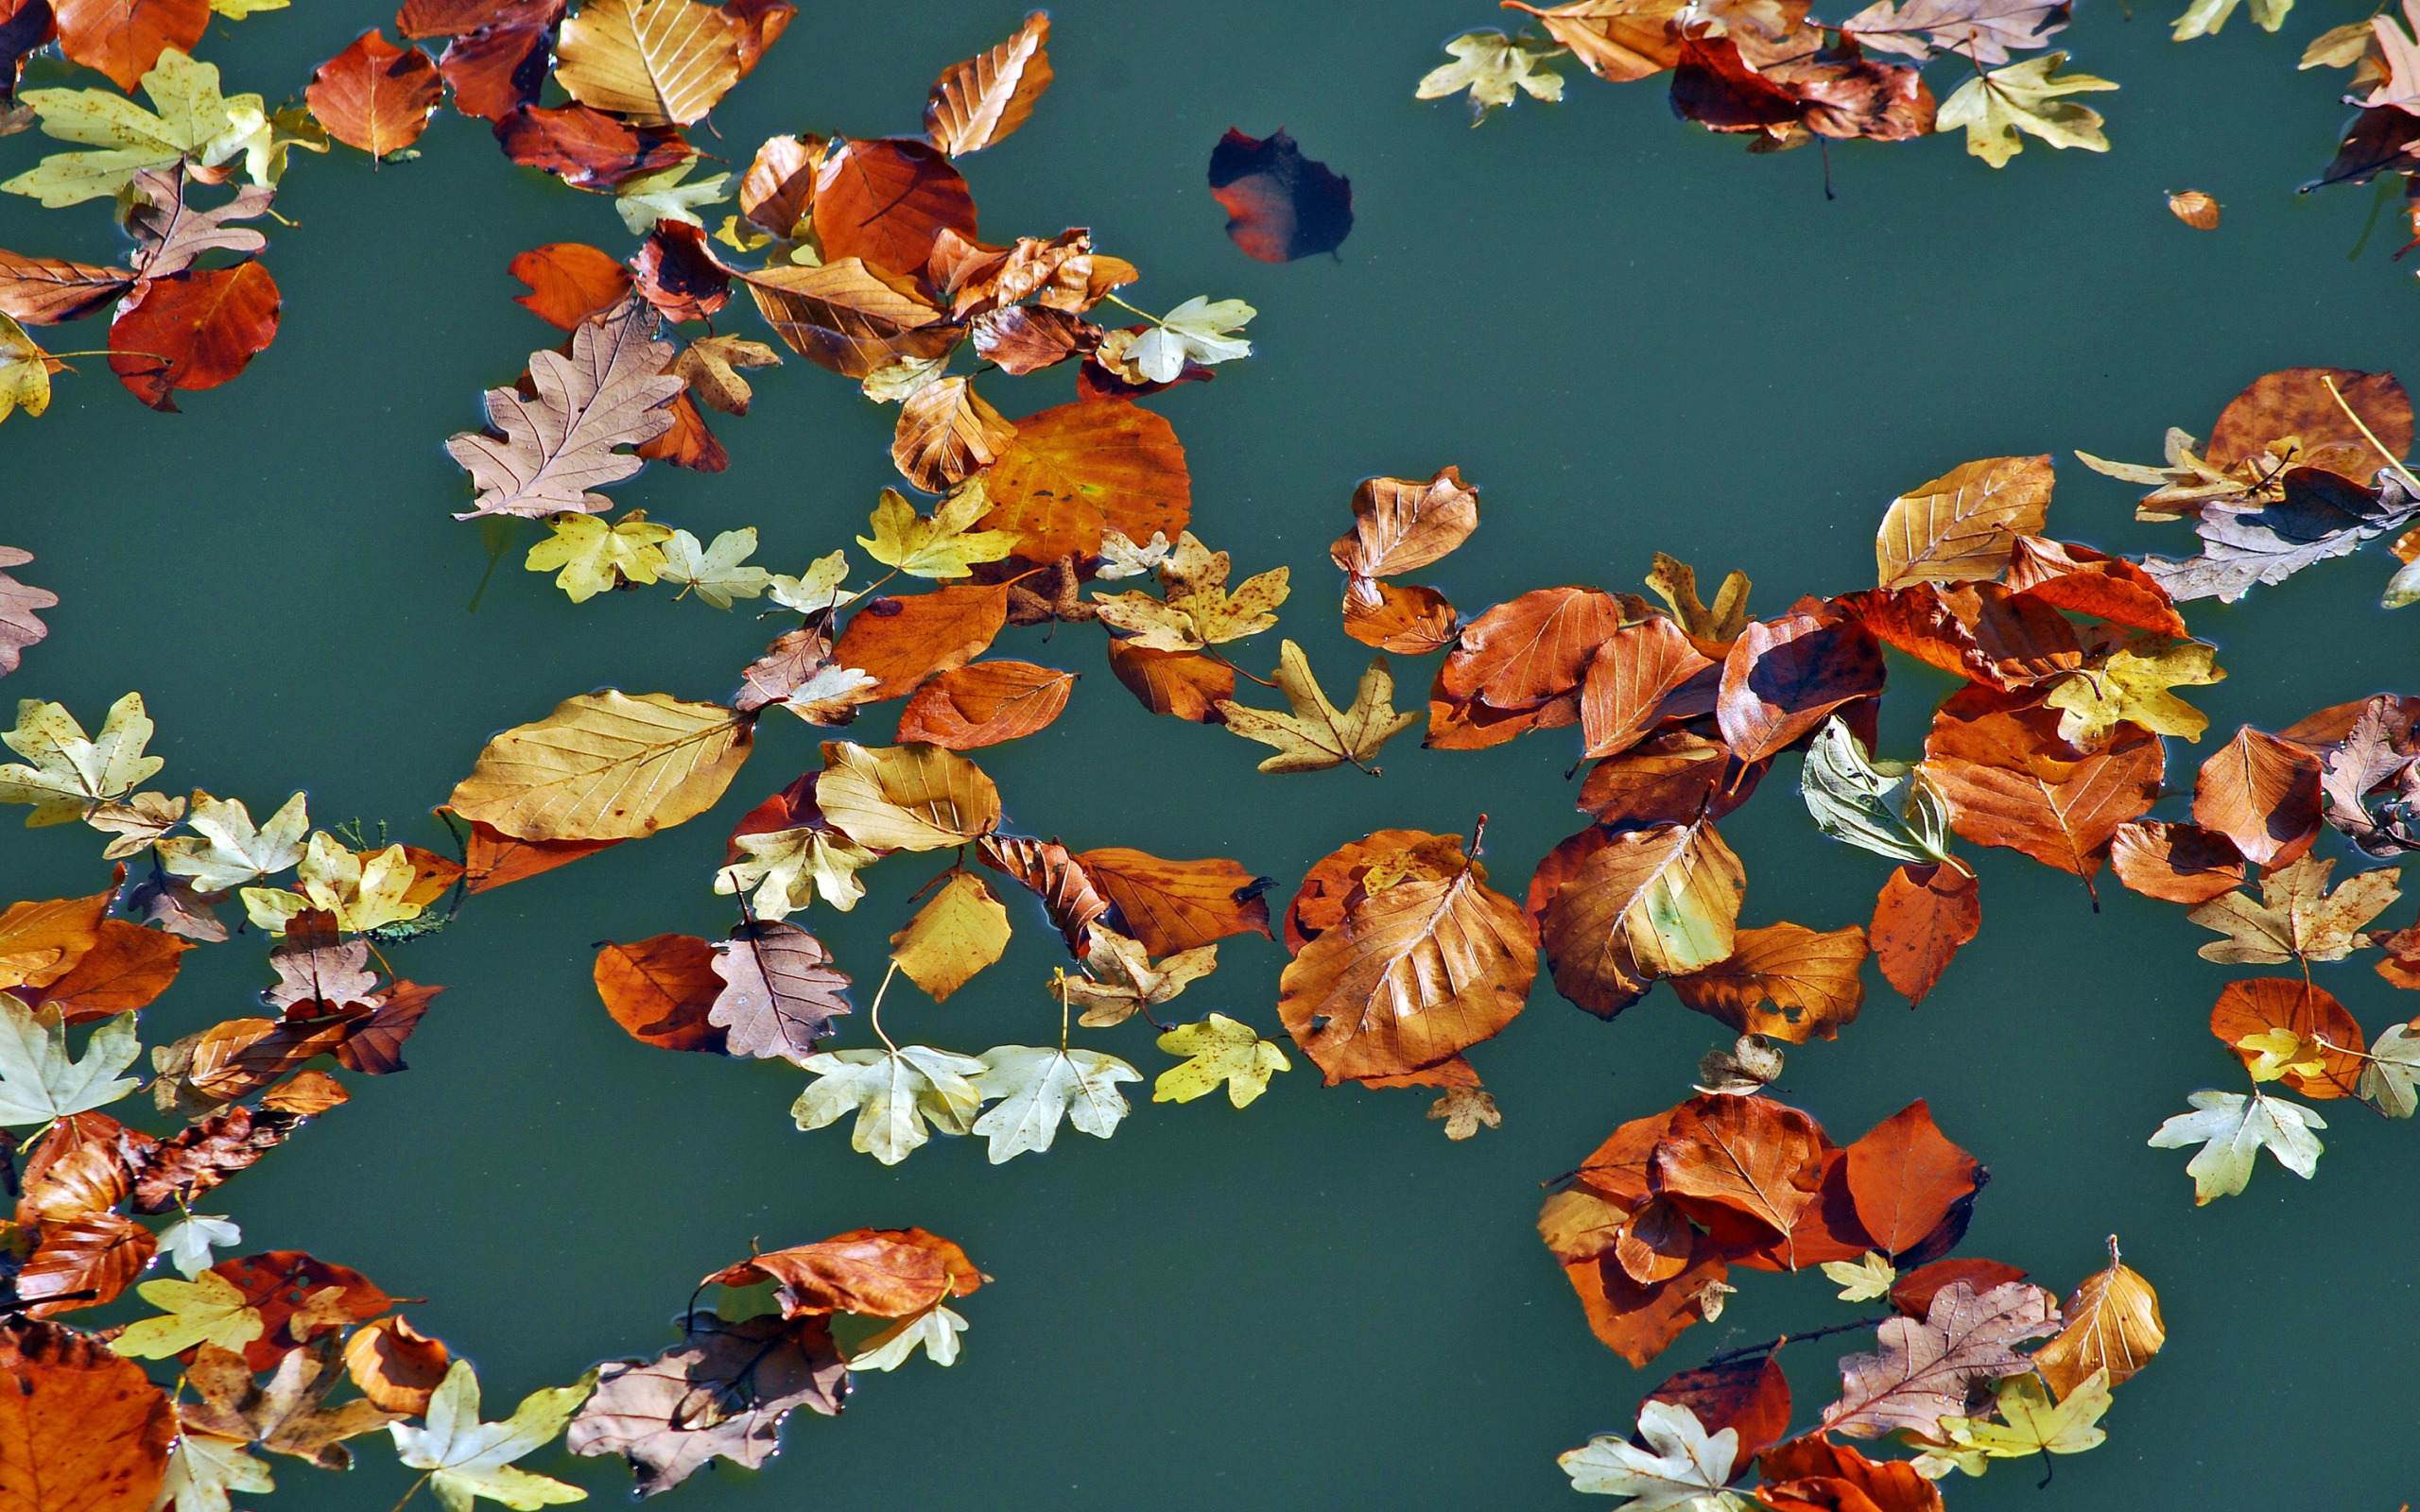 GoodFon.com - Free Wallpapers, download. autumn, leaves, water. 